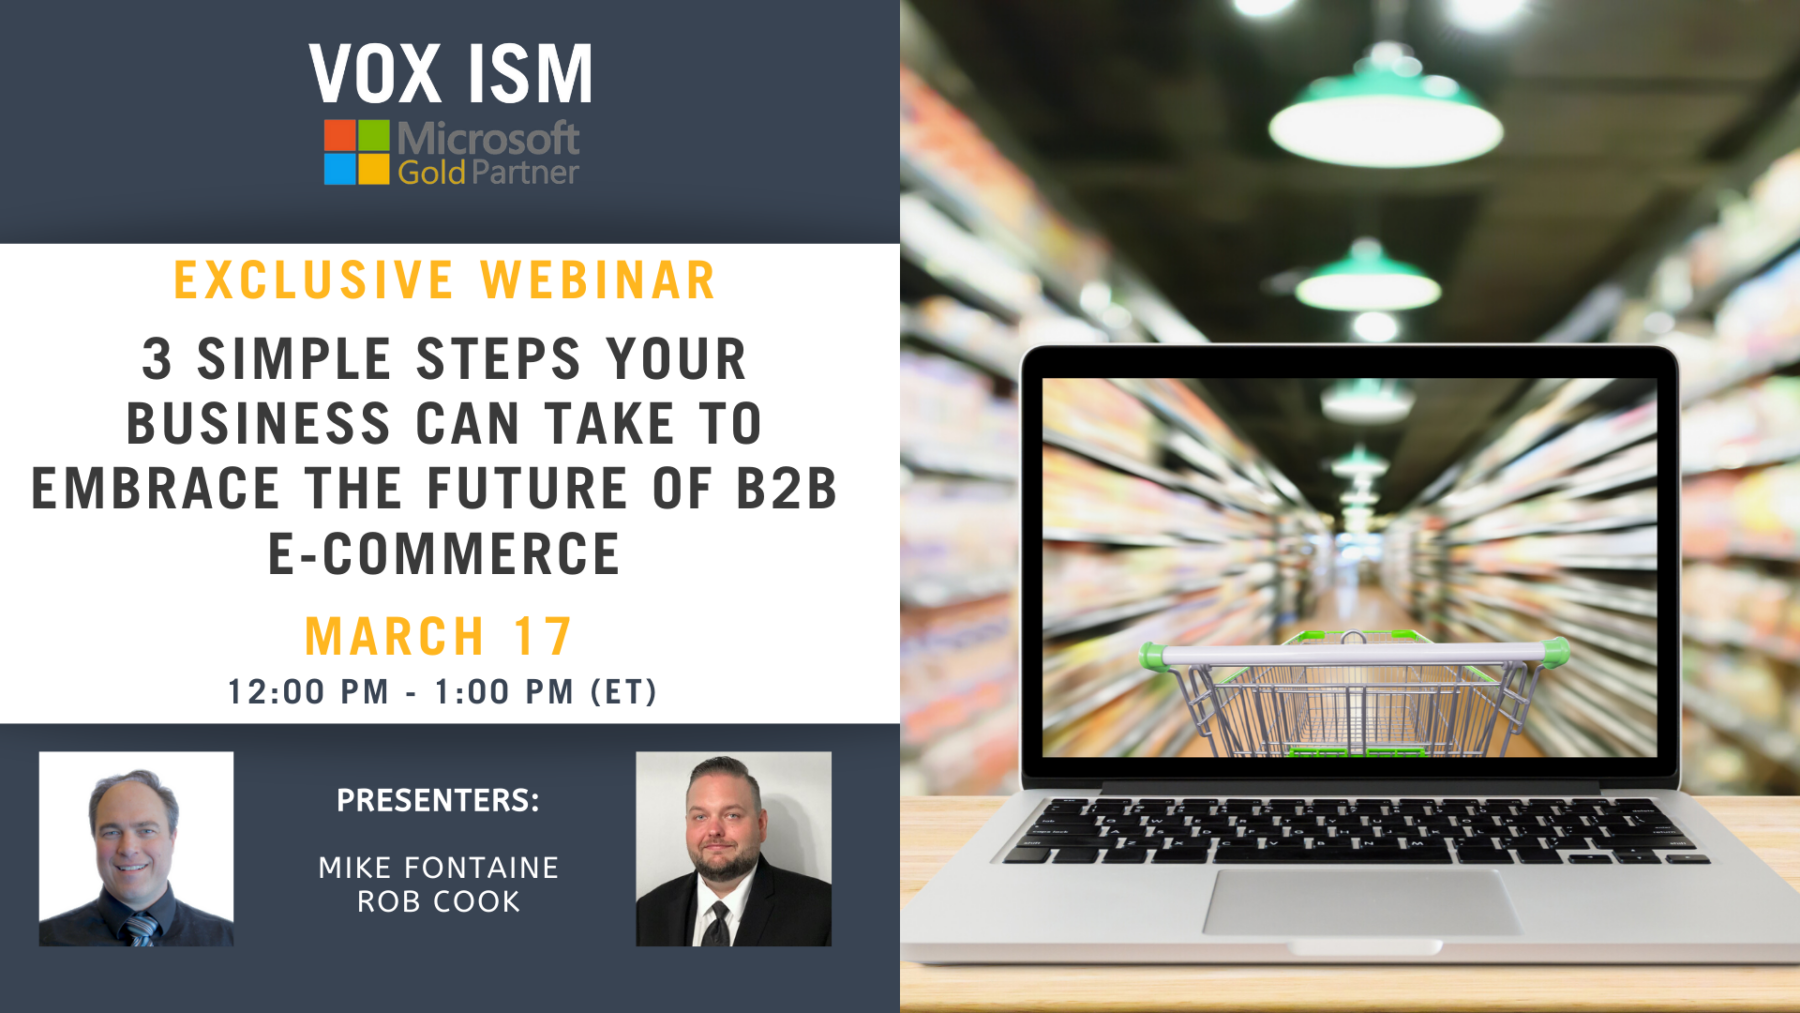 3 Simple Steps Your Business Can Take to Embrace the Future of B2B E-Commerce - March 17 - Webinar